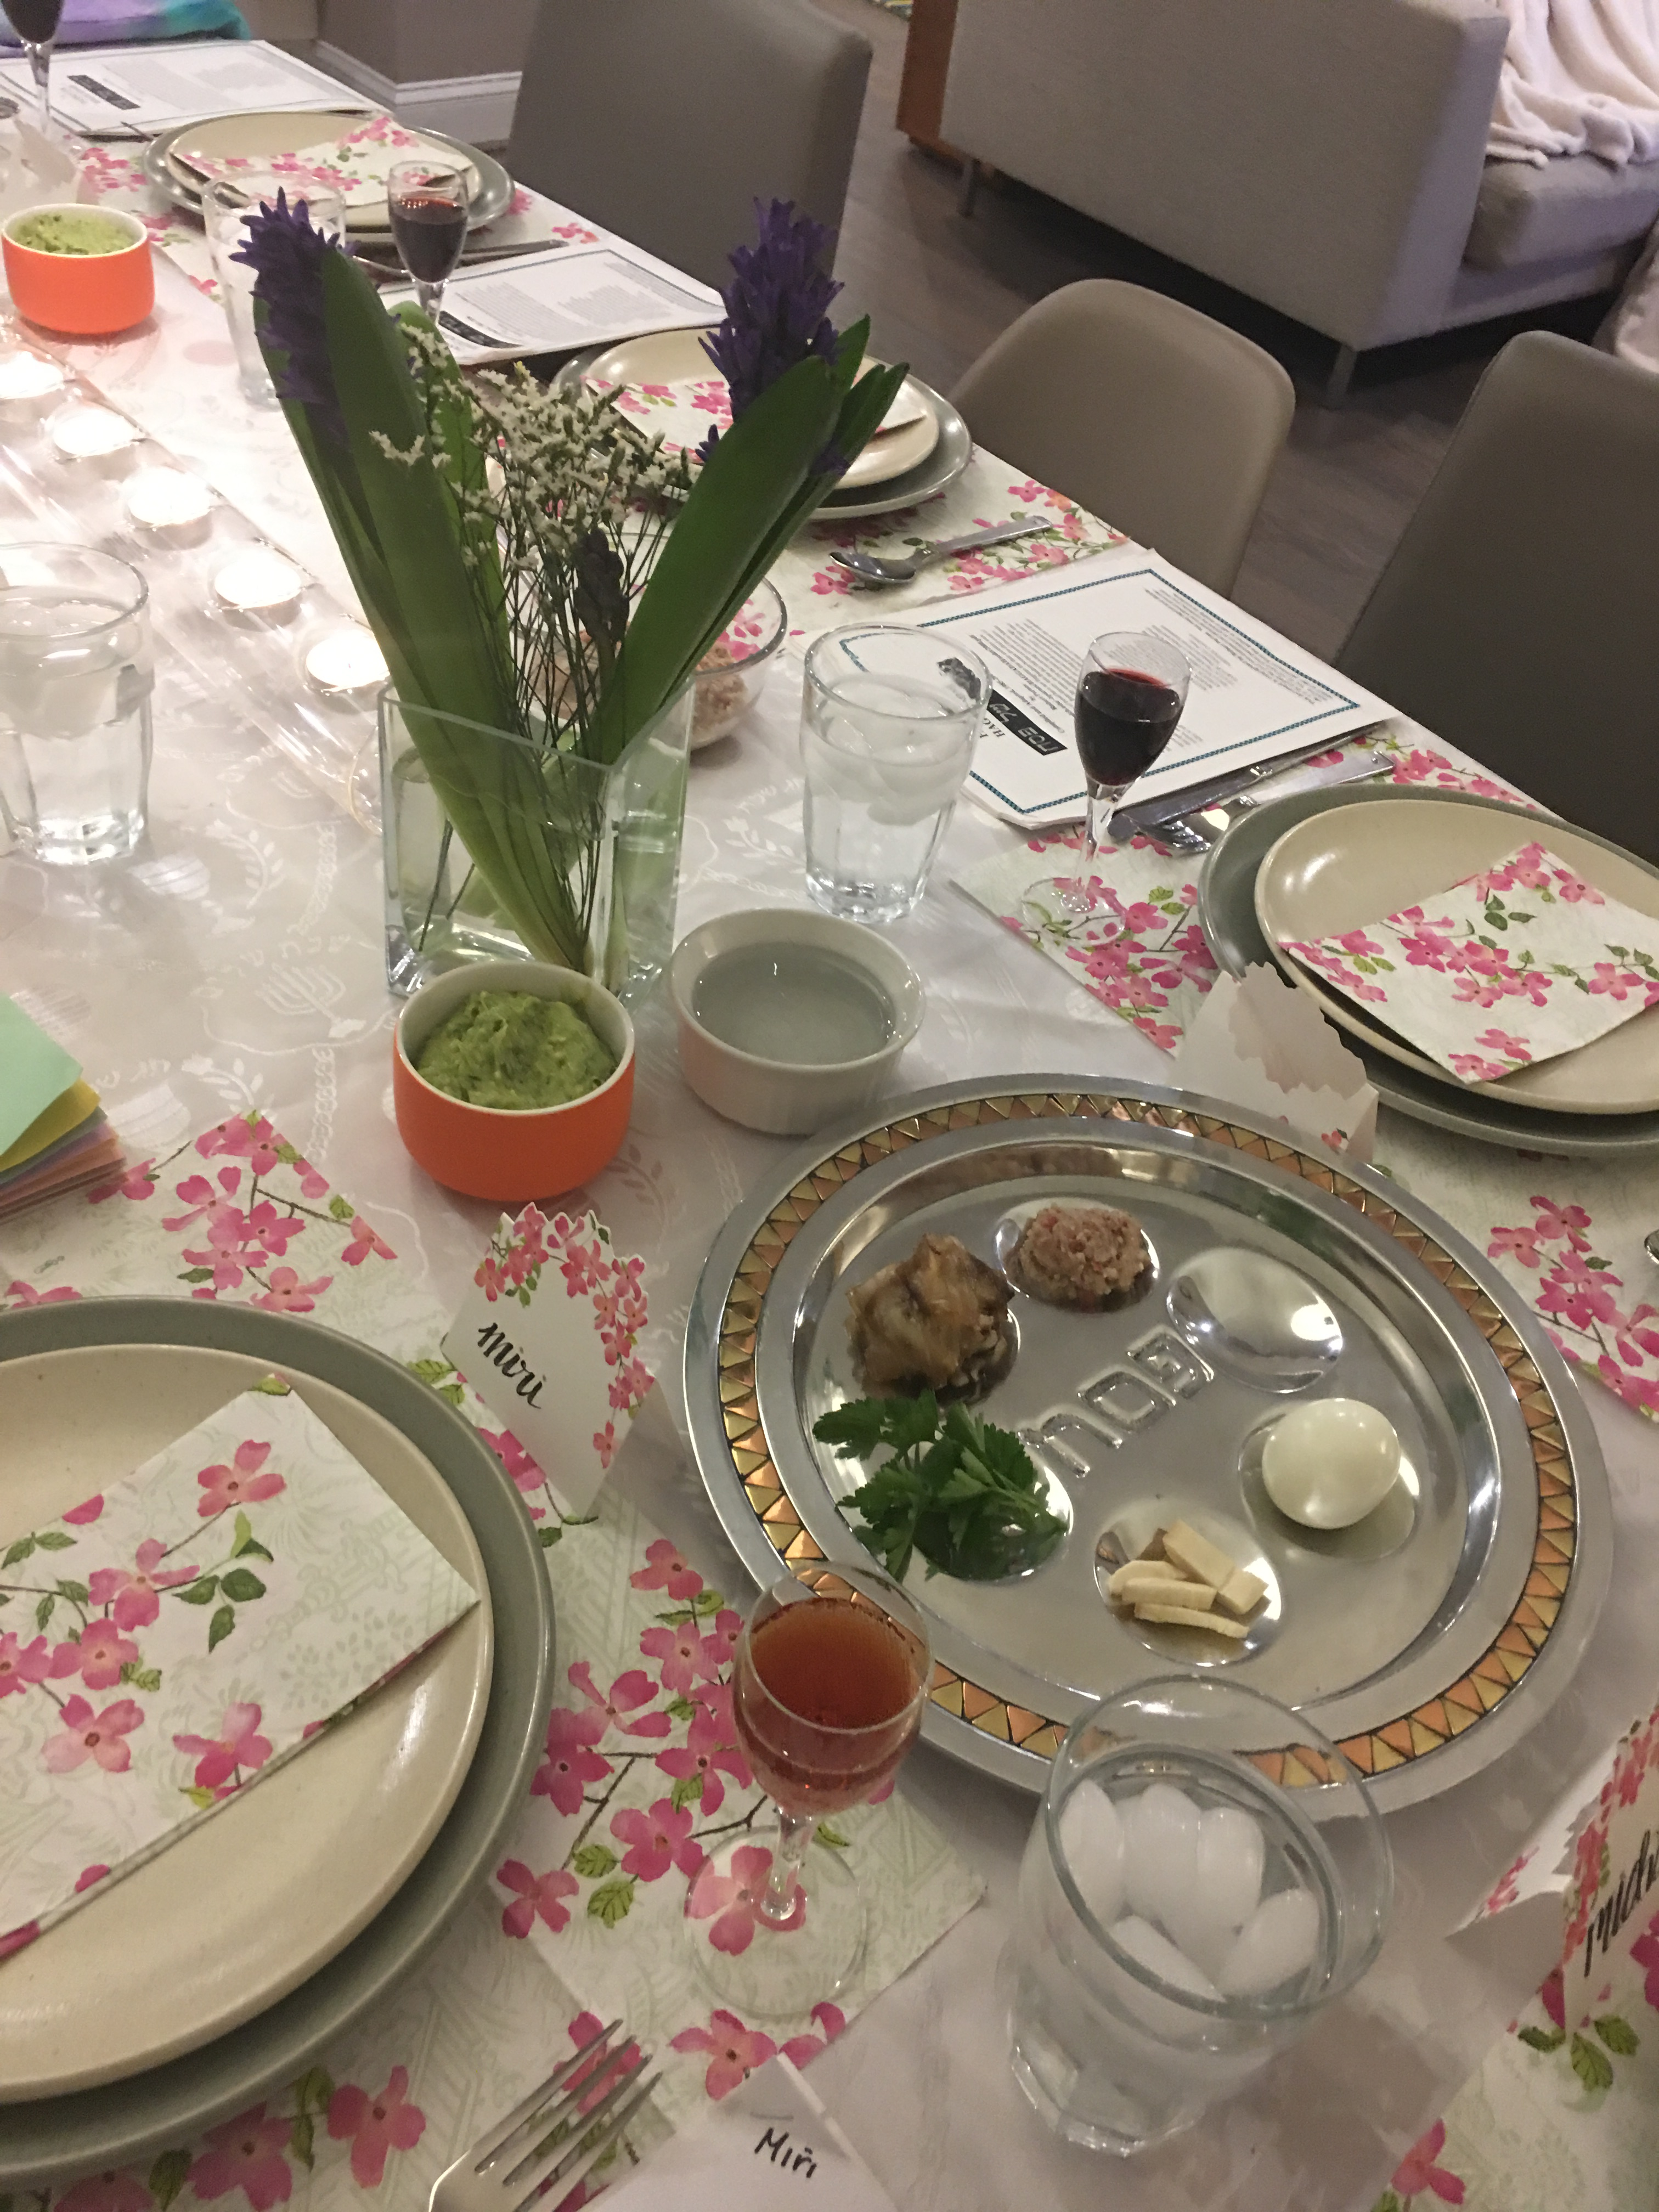 The Passover Seder: Passing on the Story of Freedom Bella Behar Contributor Miami Moms Blog